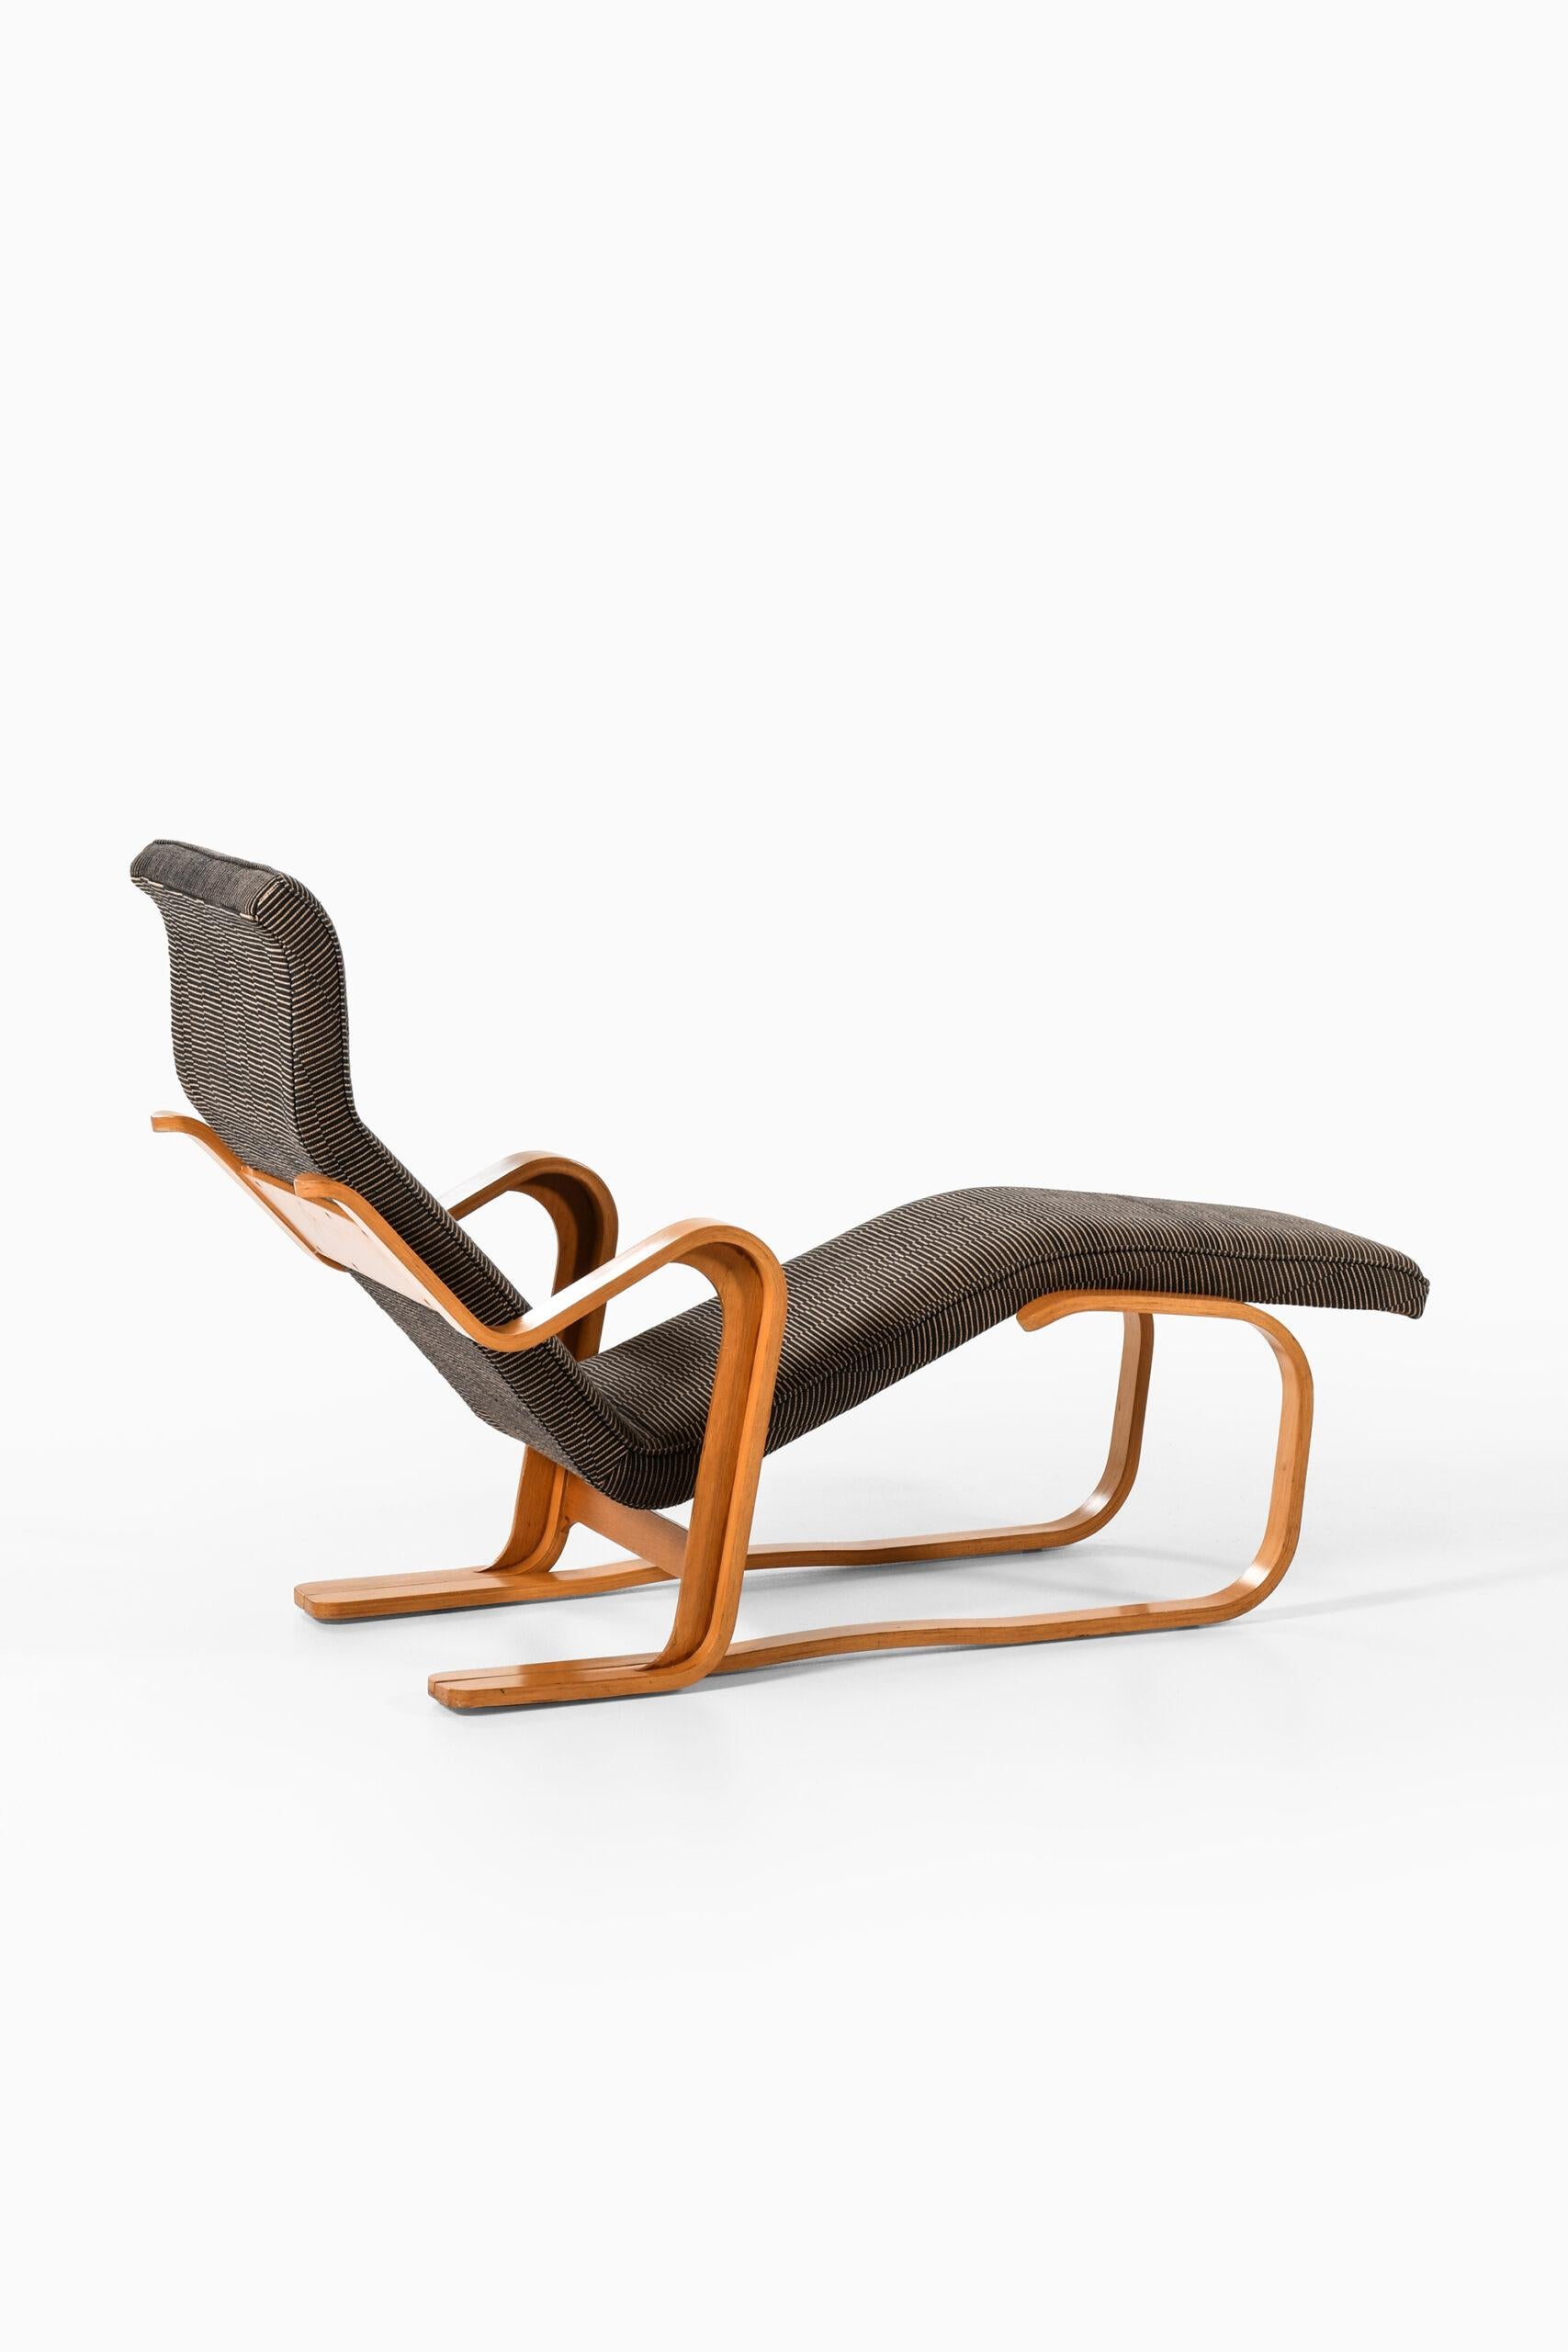 Marcel Breuer Lounge Chair Produced by Isokon For Sale 2